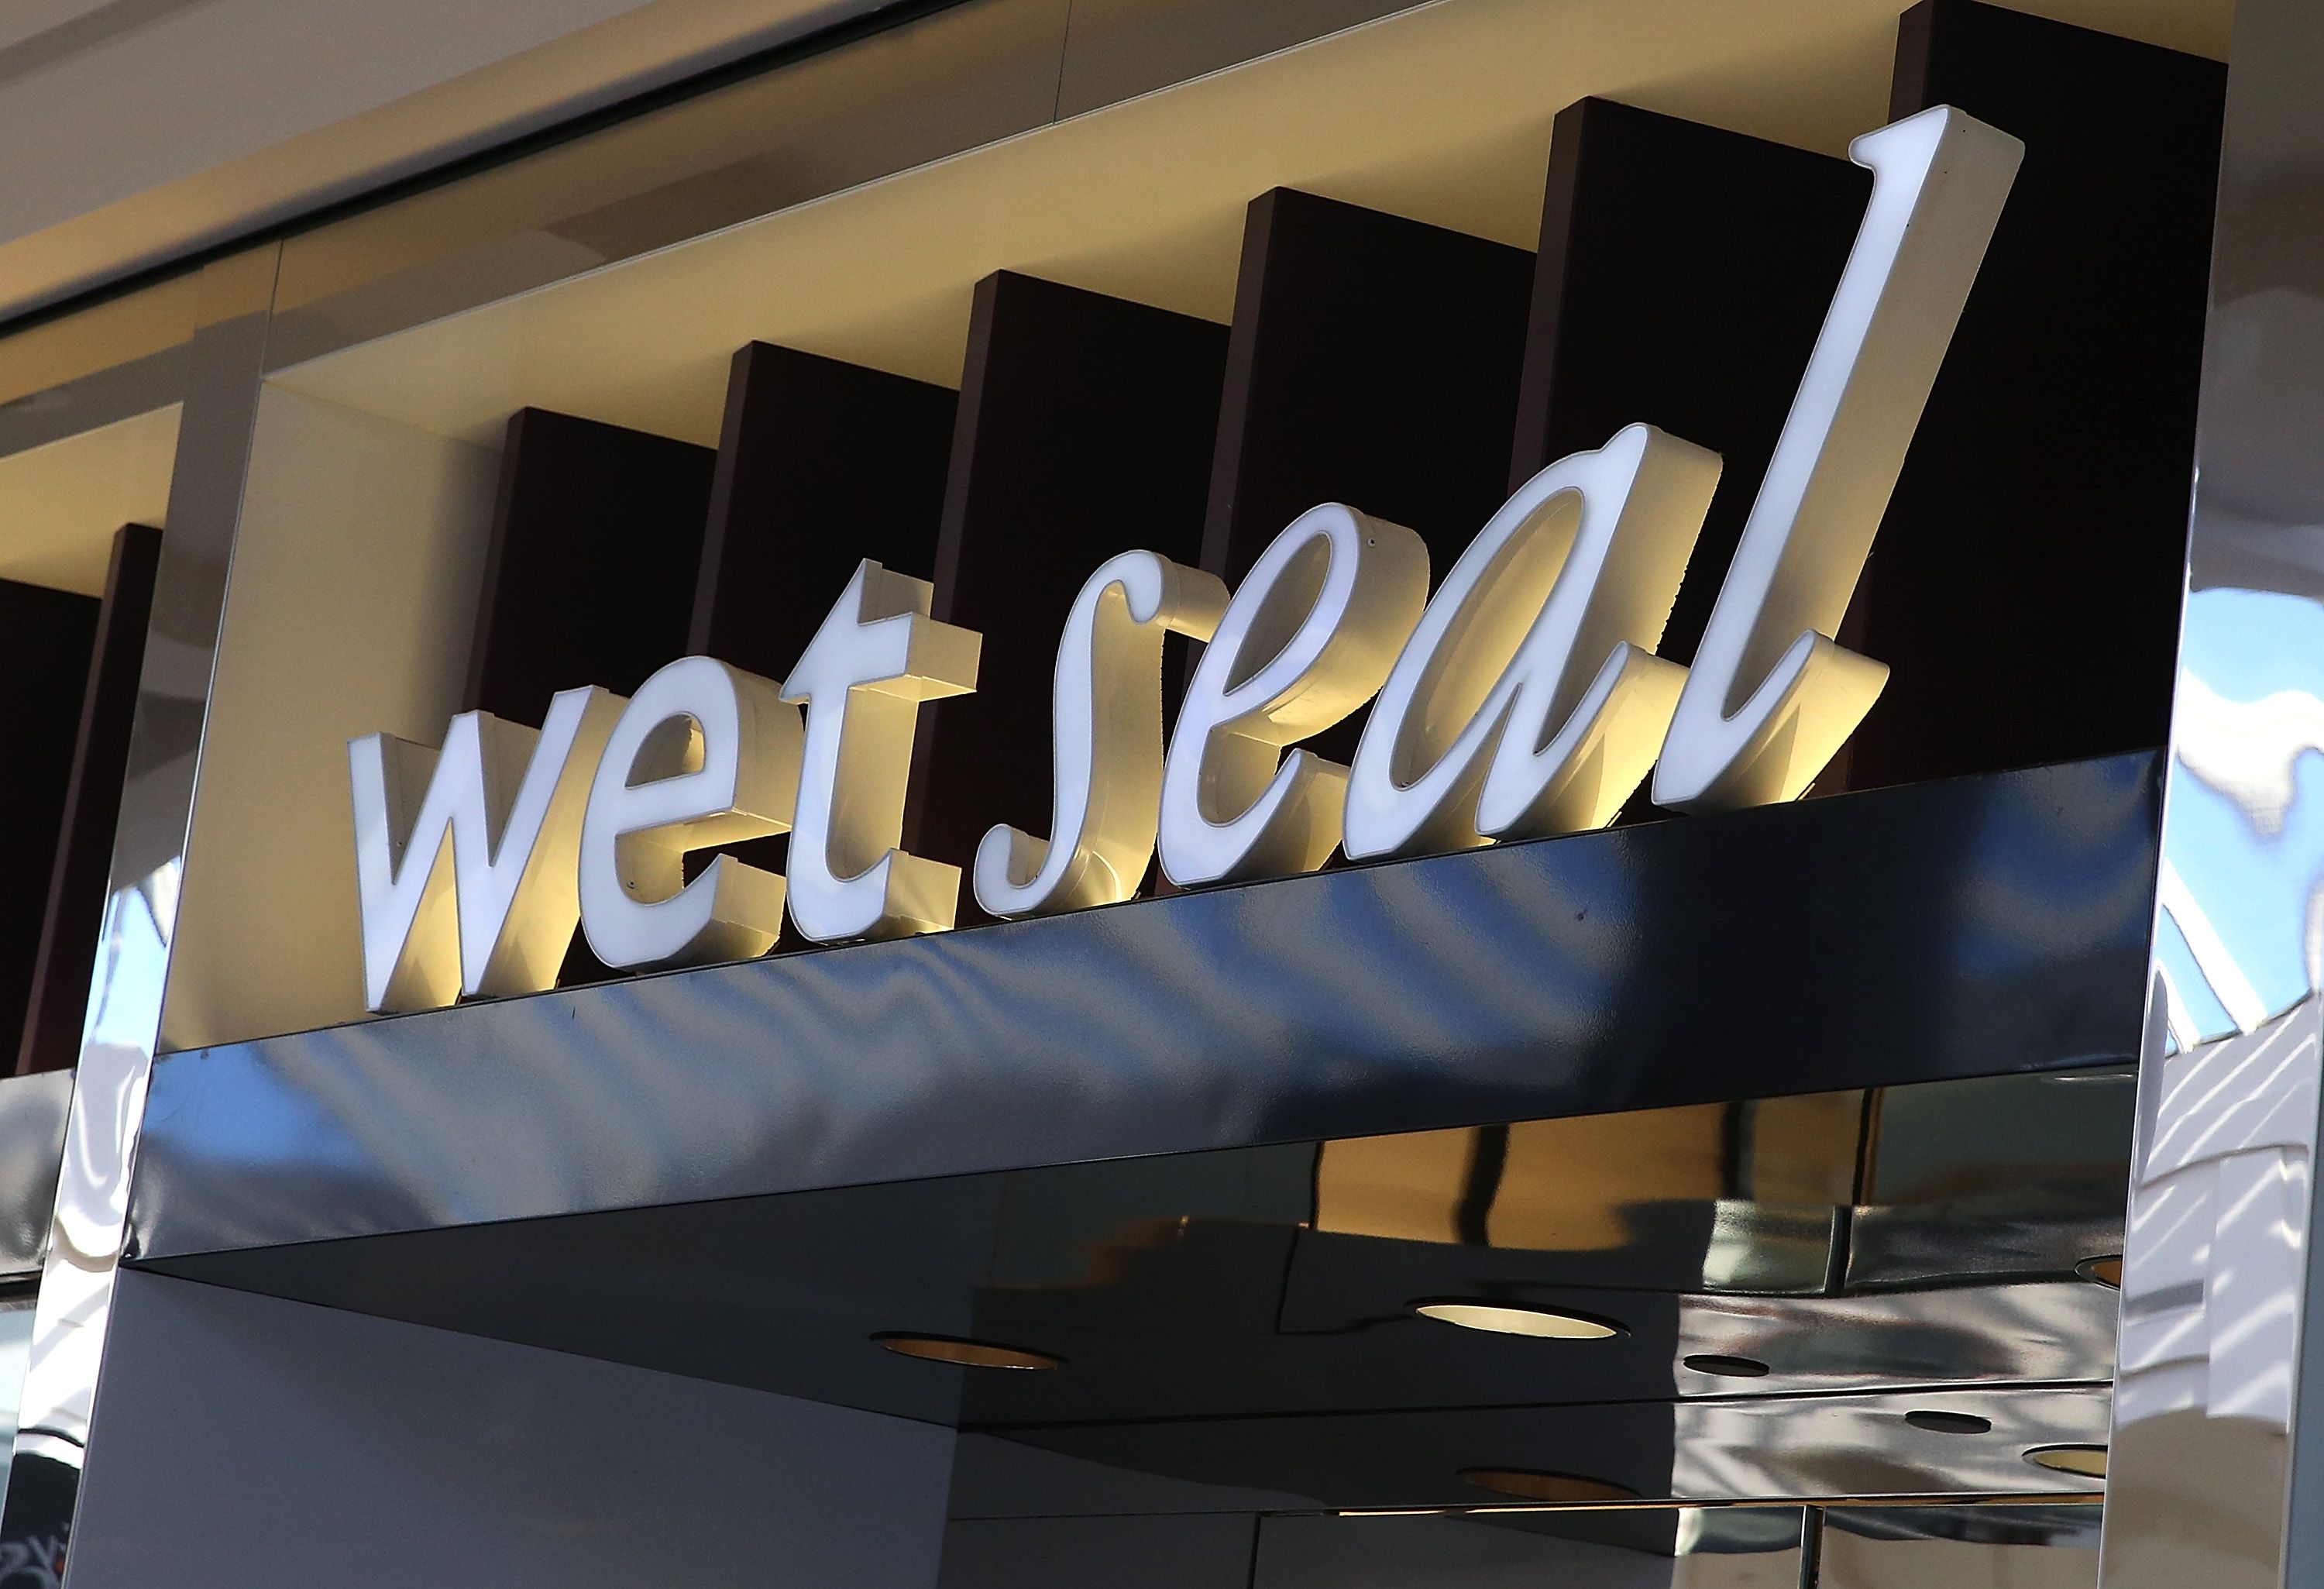 22 Things From Wet Seal You Definitely Owned at One Point in Your Life